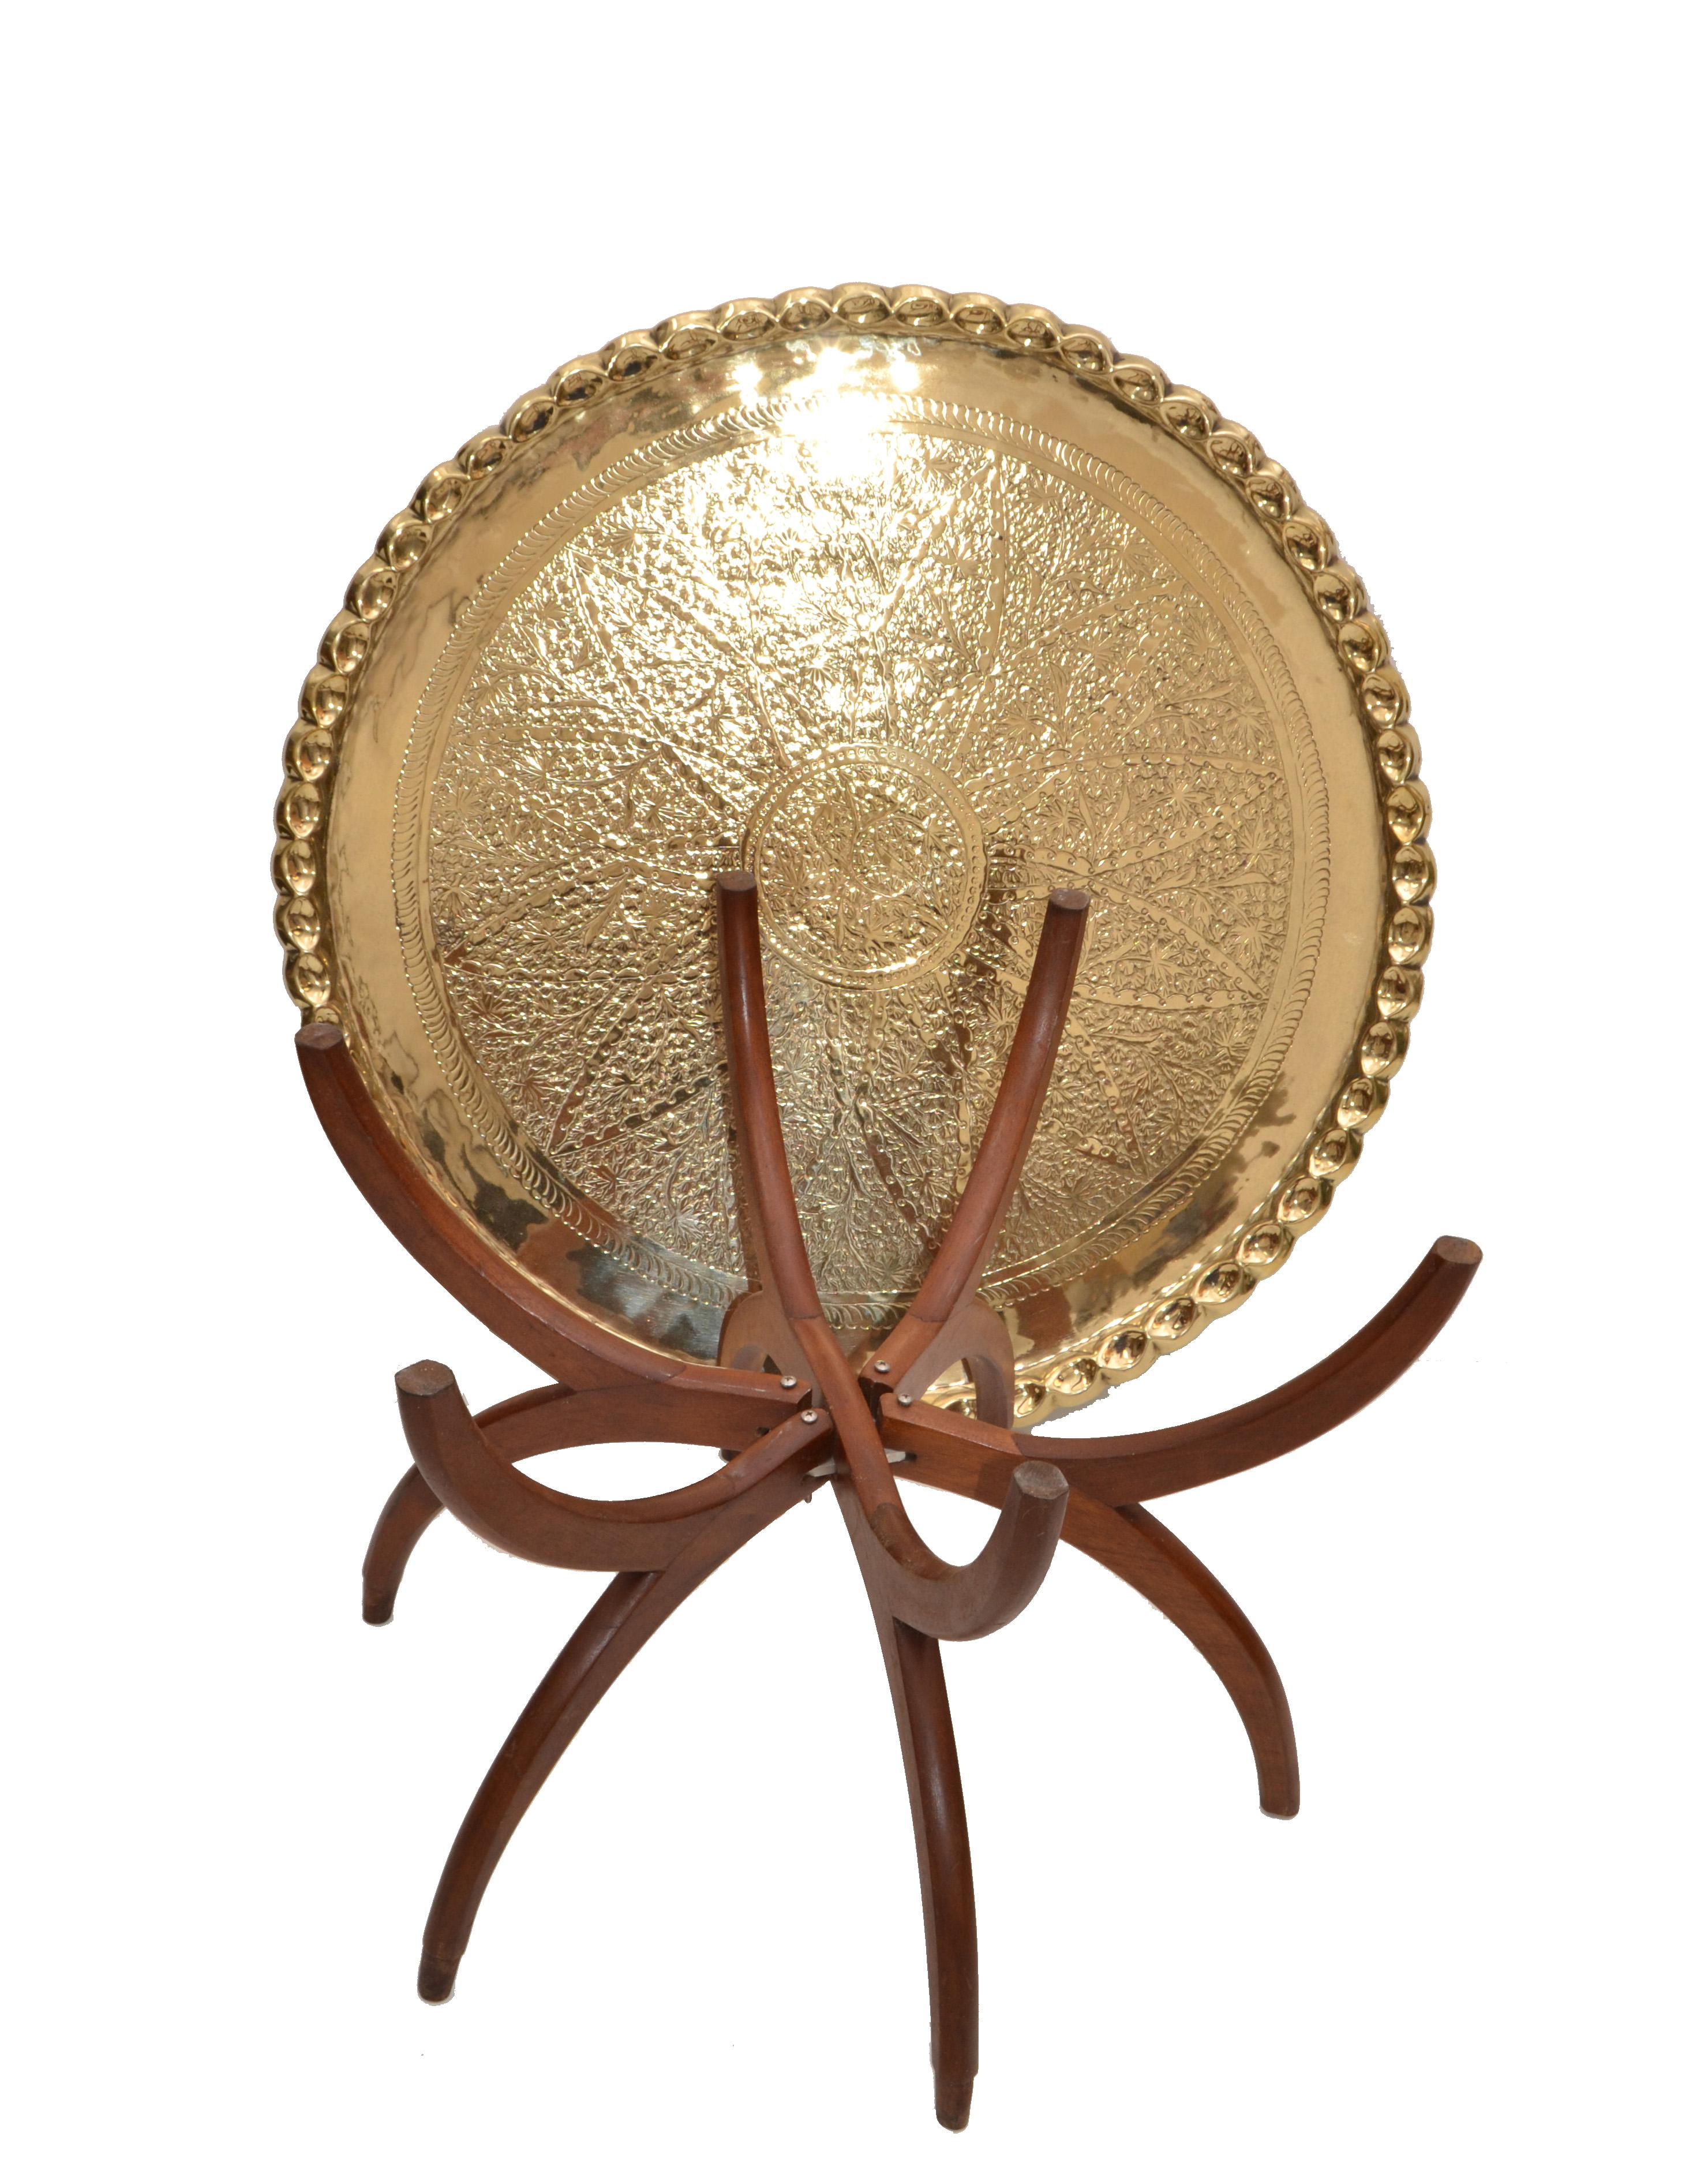 Mid-20th Century Mid-Century Modern Round Walnut Spider Leg and Bronze Moroccan Tray Coffee Table For Sale